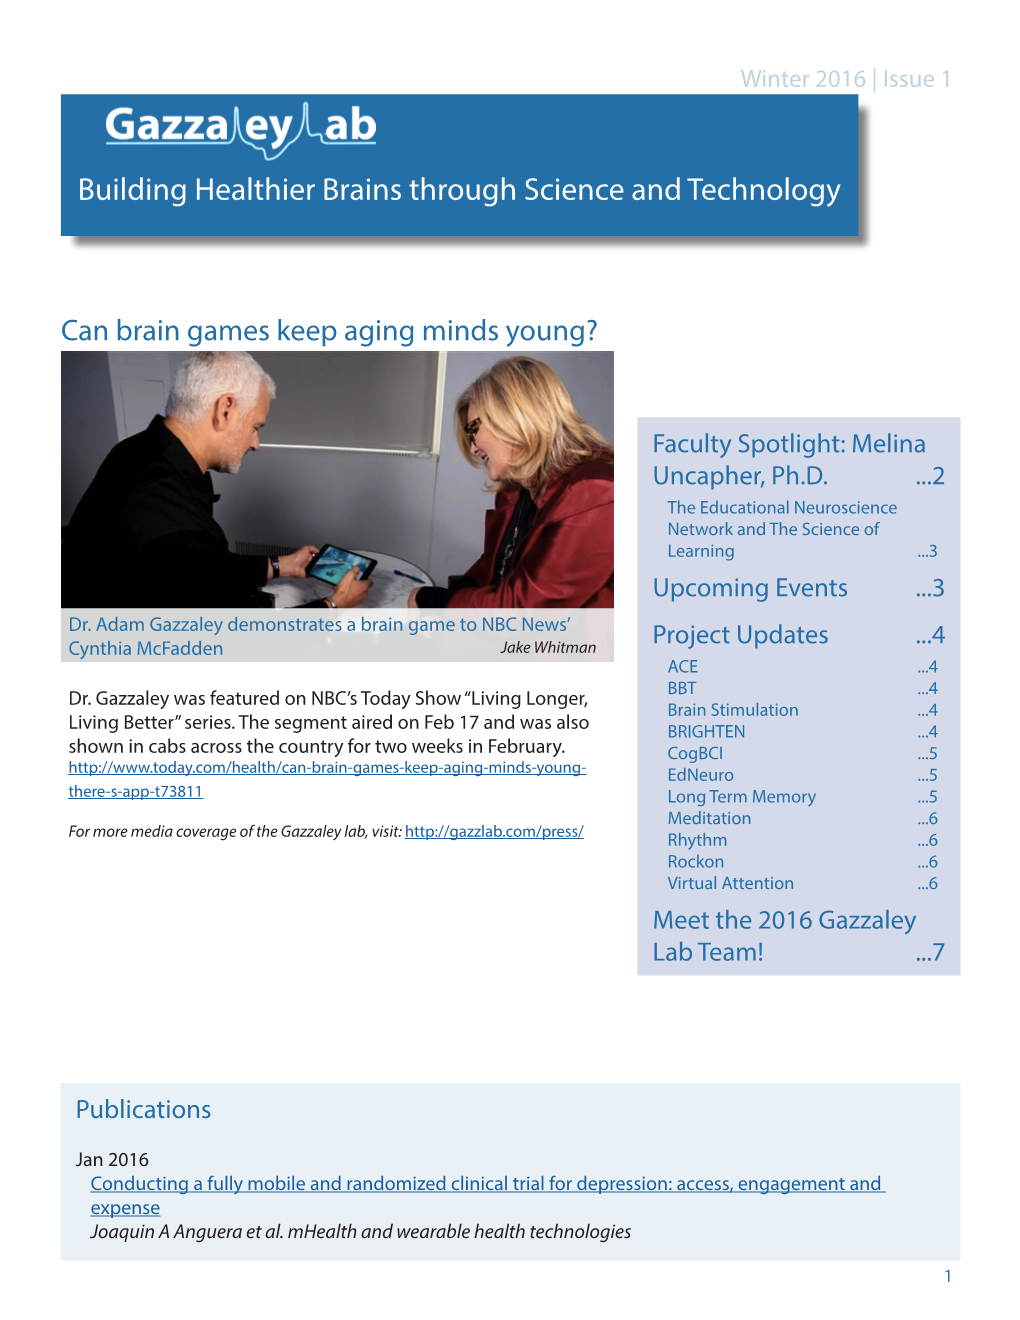 Building Healthier Brains Through Science and Technology